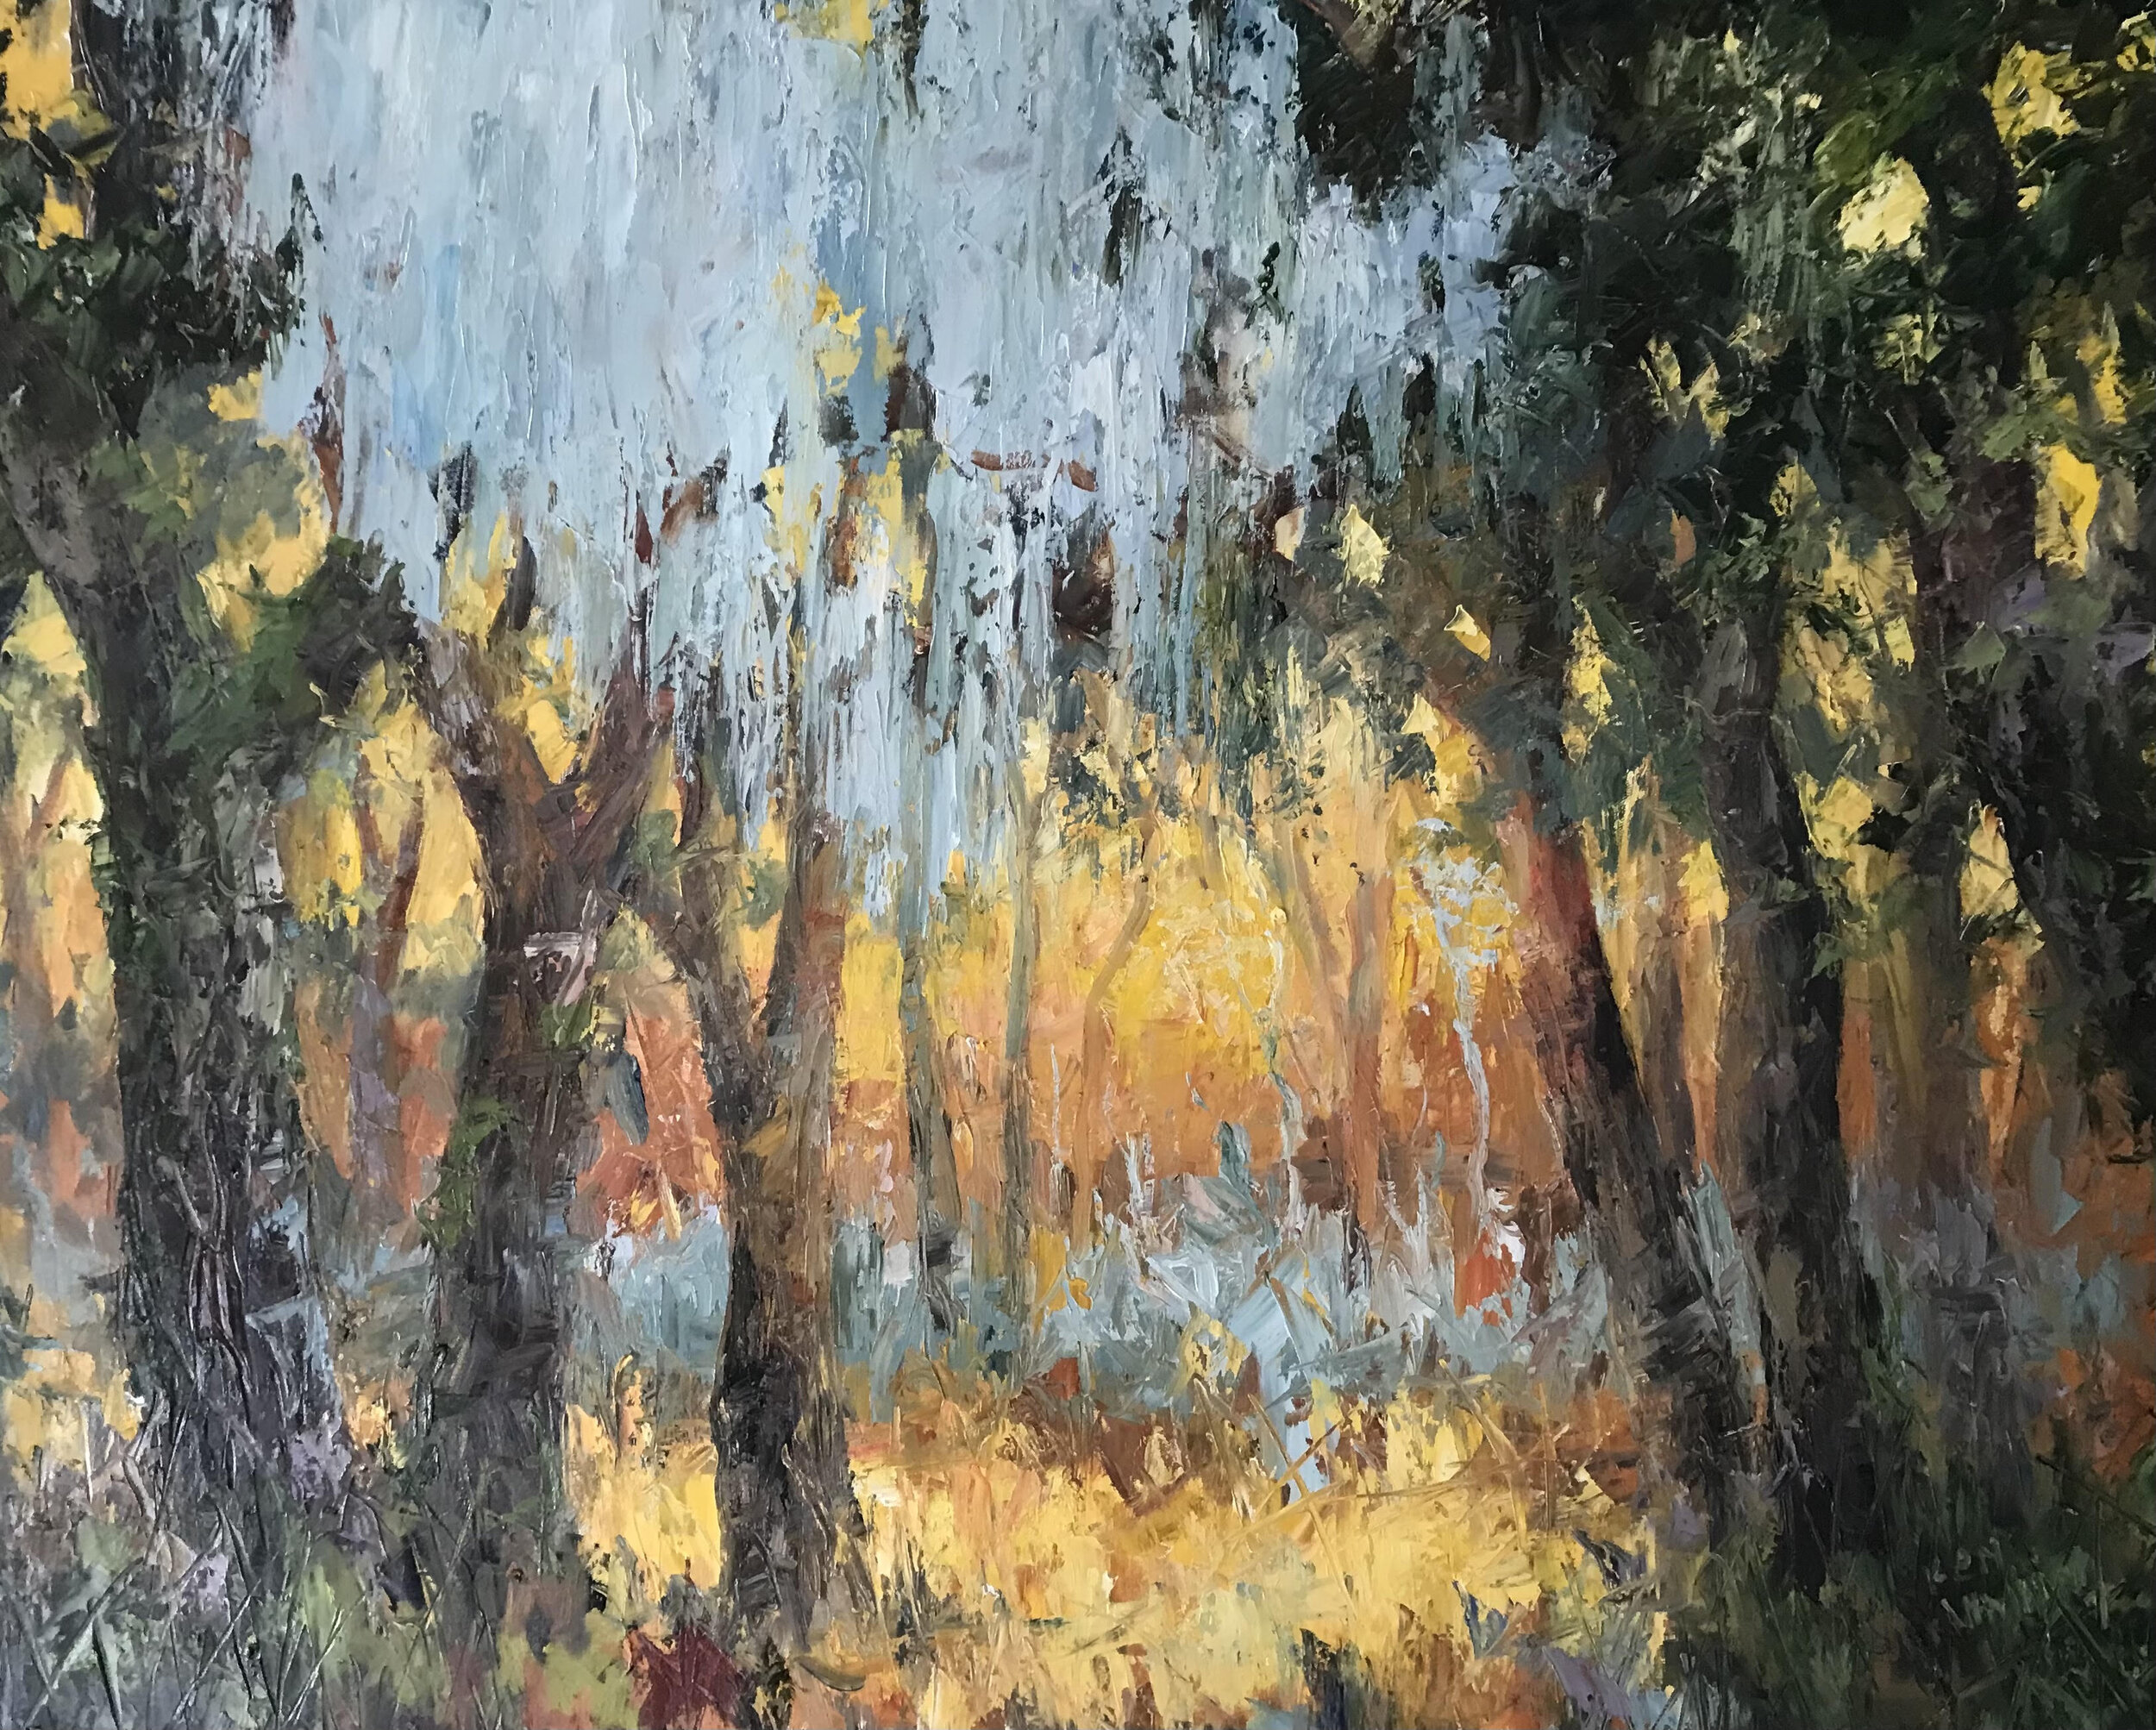 Morning Light on the Oaks. Oil on Canvas © 2021 Ken Wallin. All Rights Reserved.